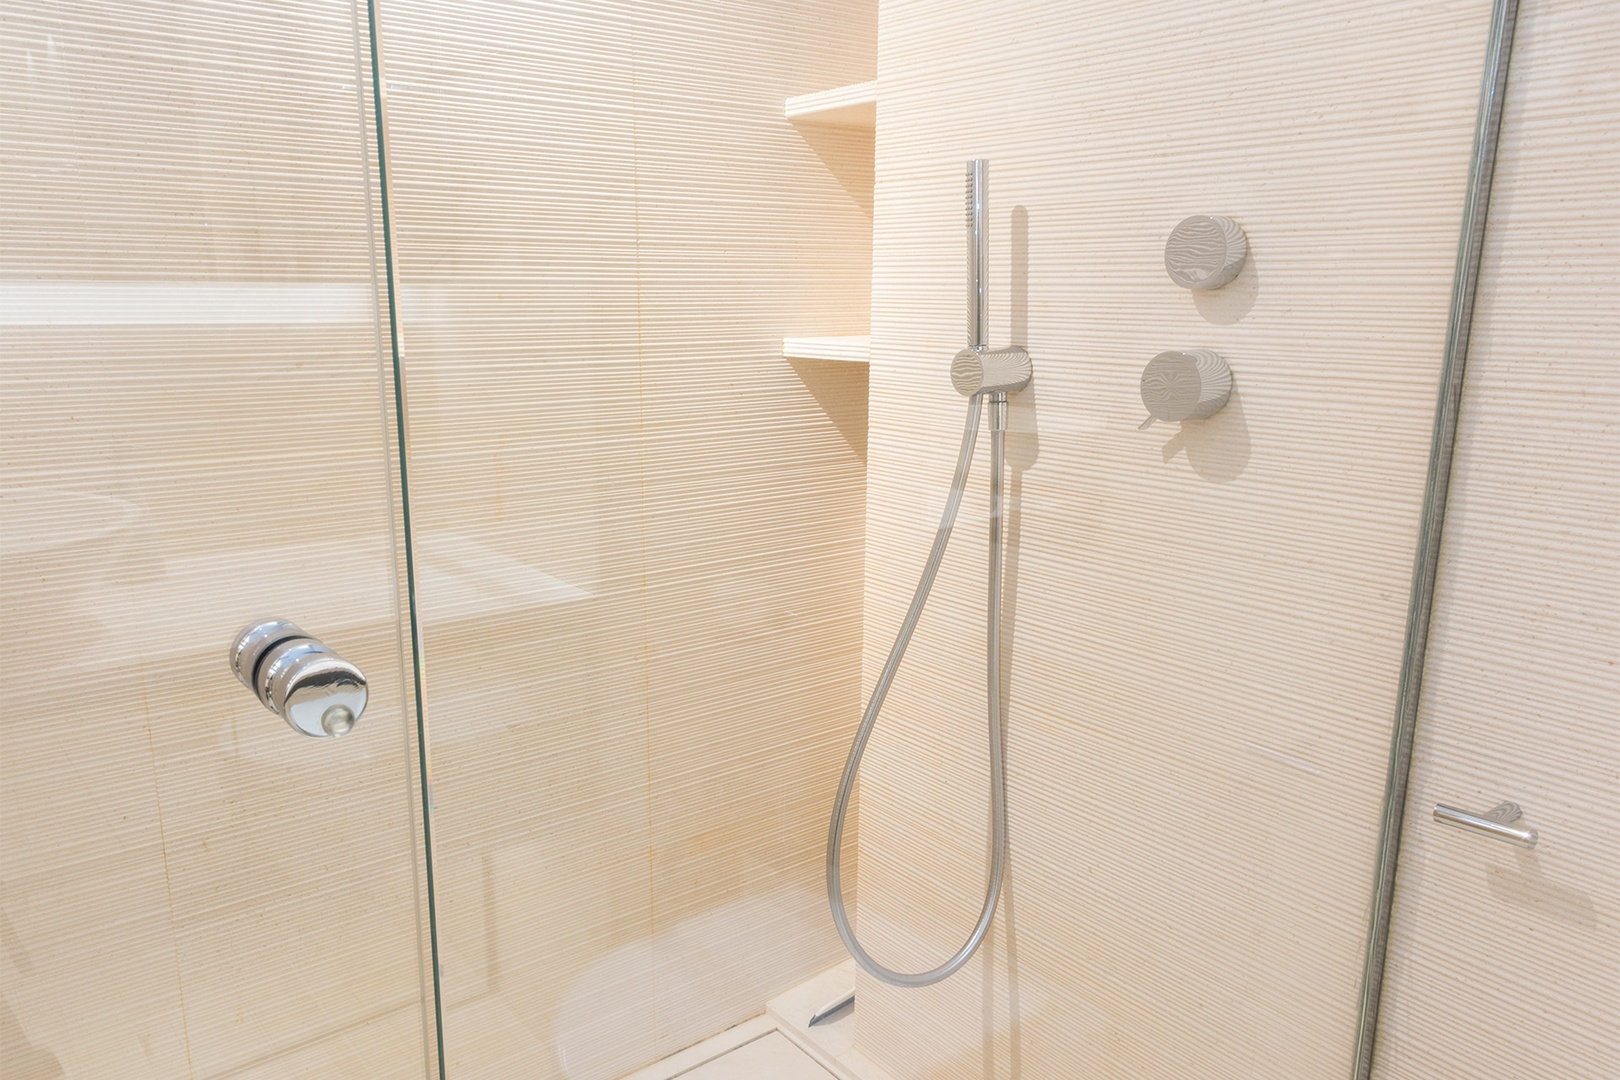 The large shower in bathroom 2 has fixed and flexible shower heads for your convenience.